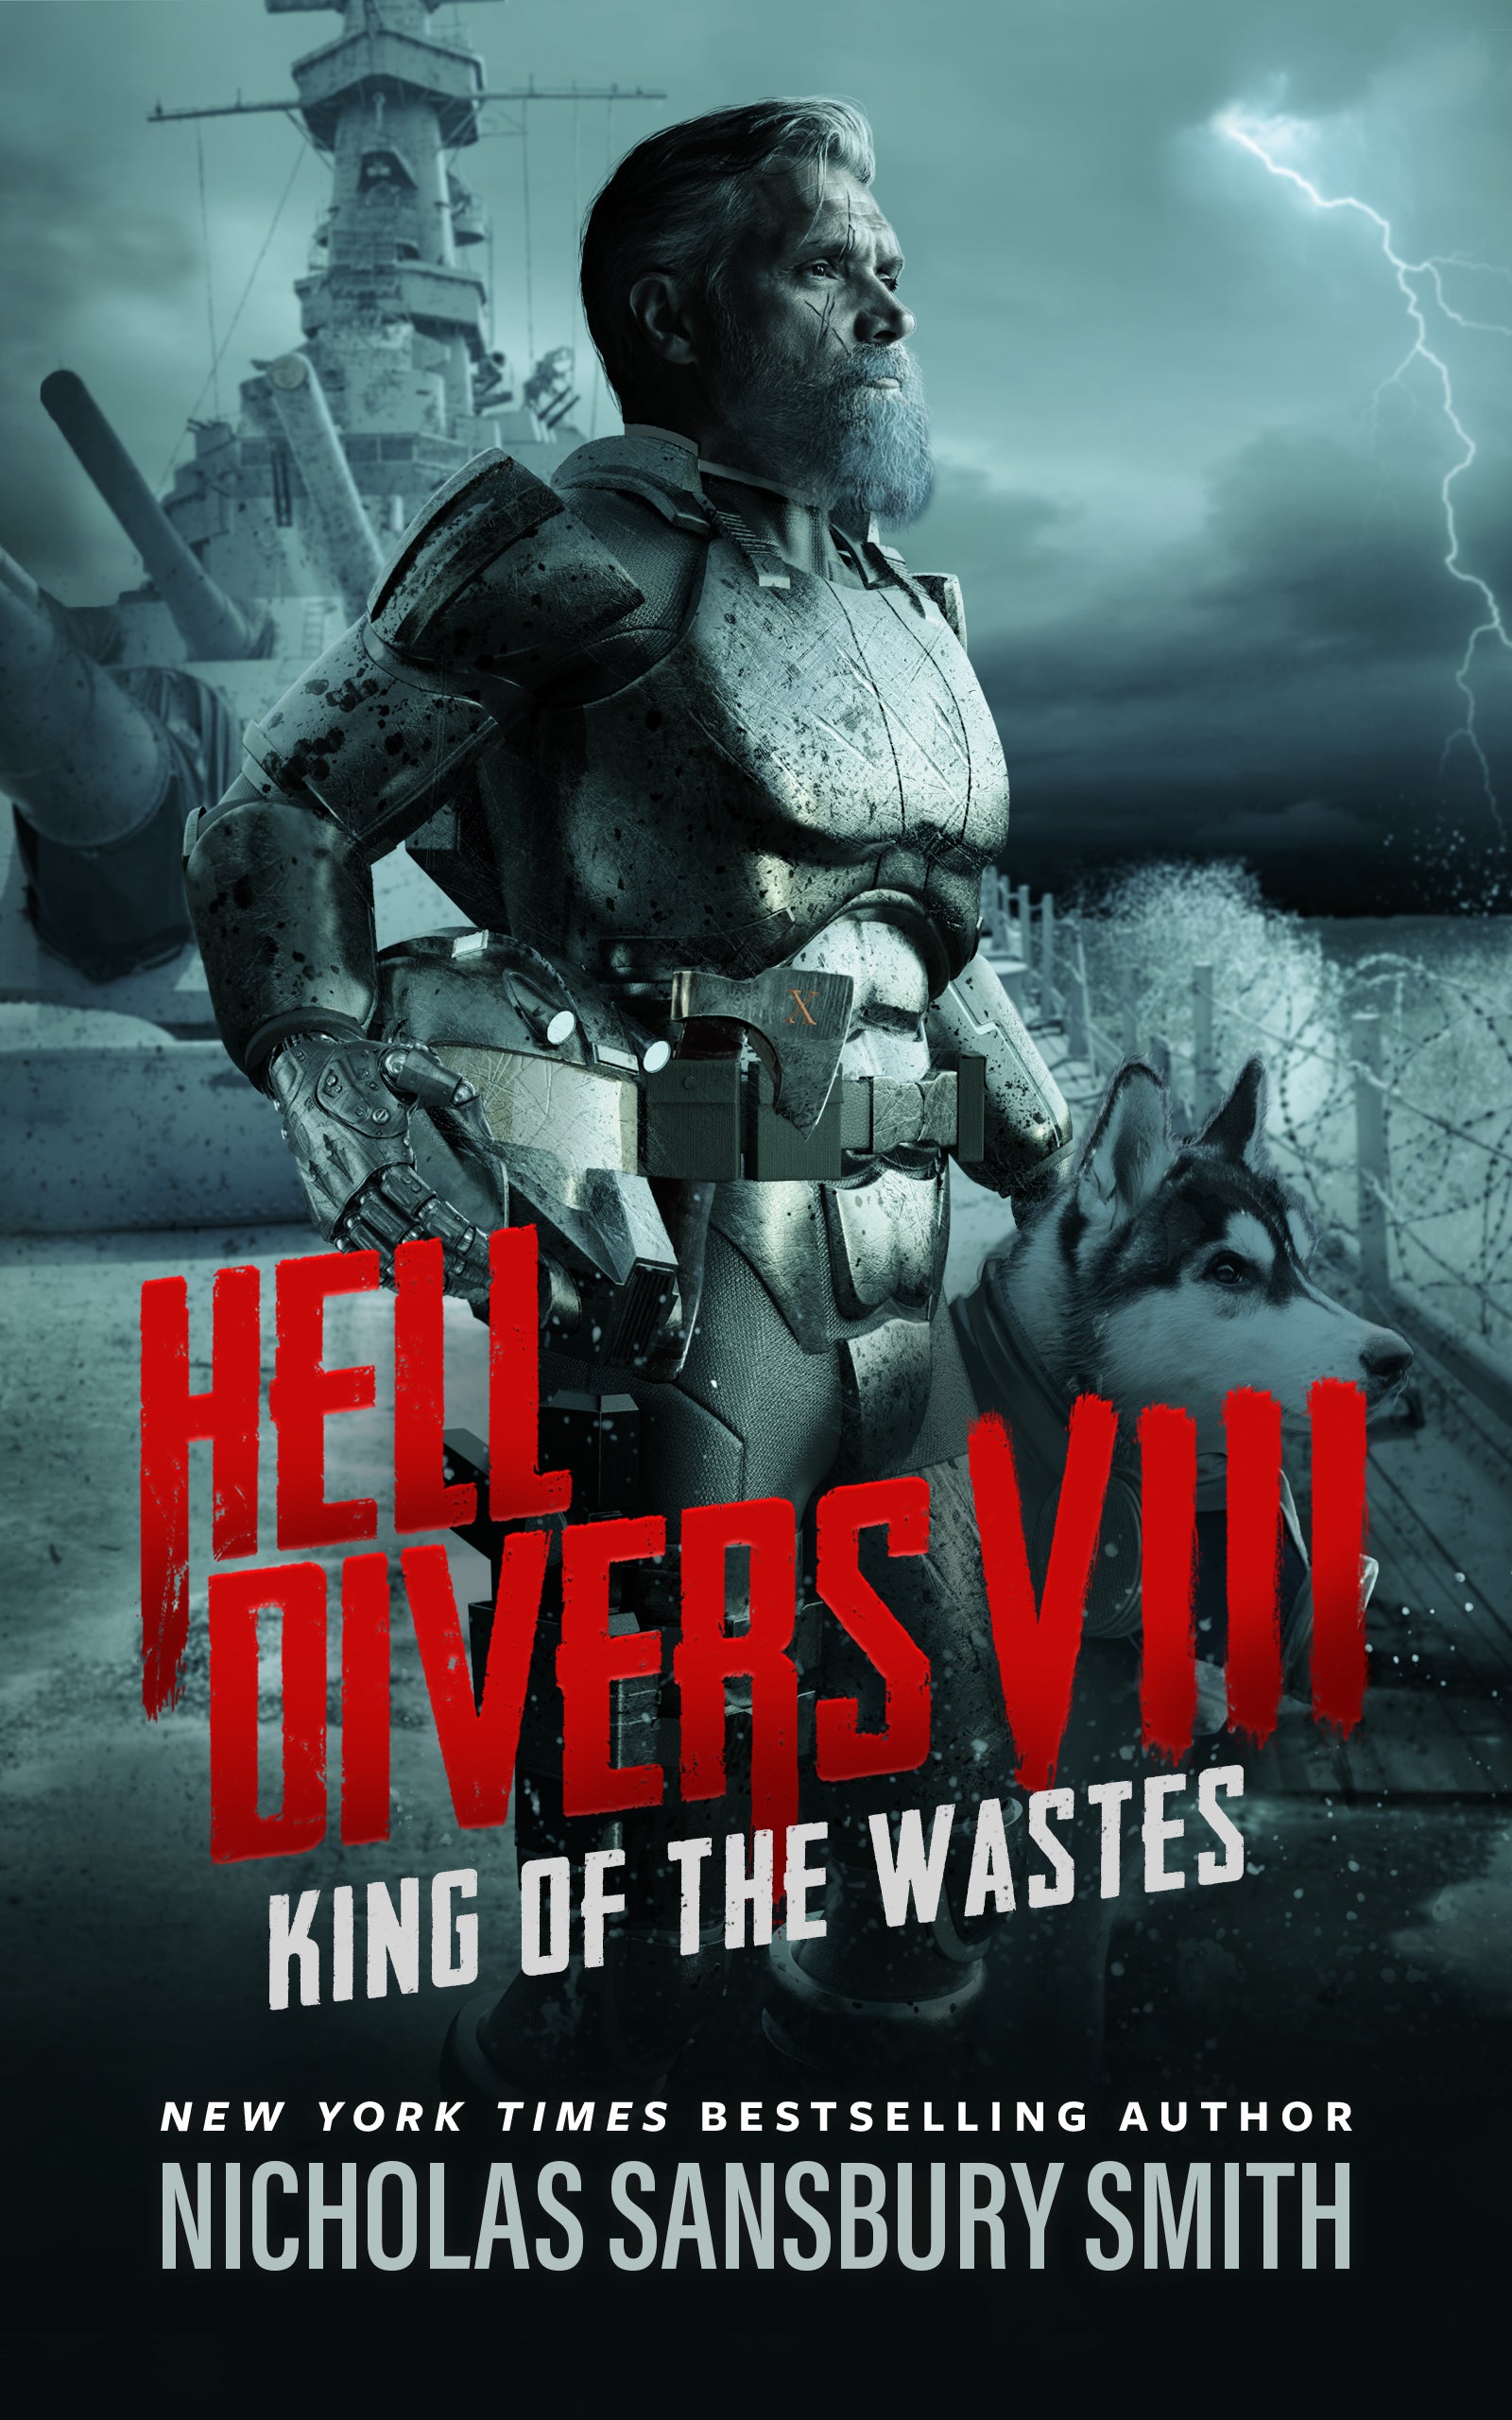 Hell Divers VIII: King of the Wastes